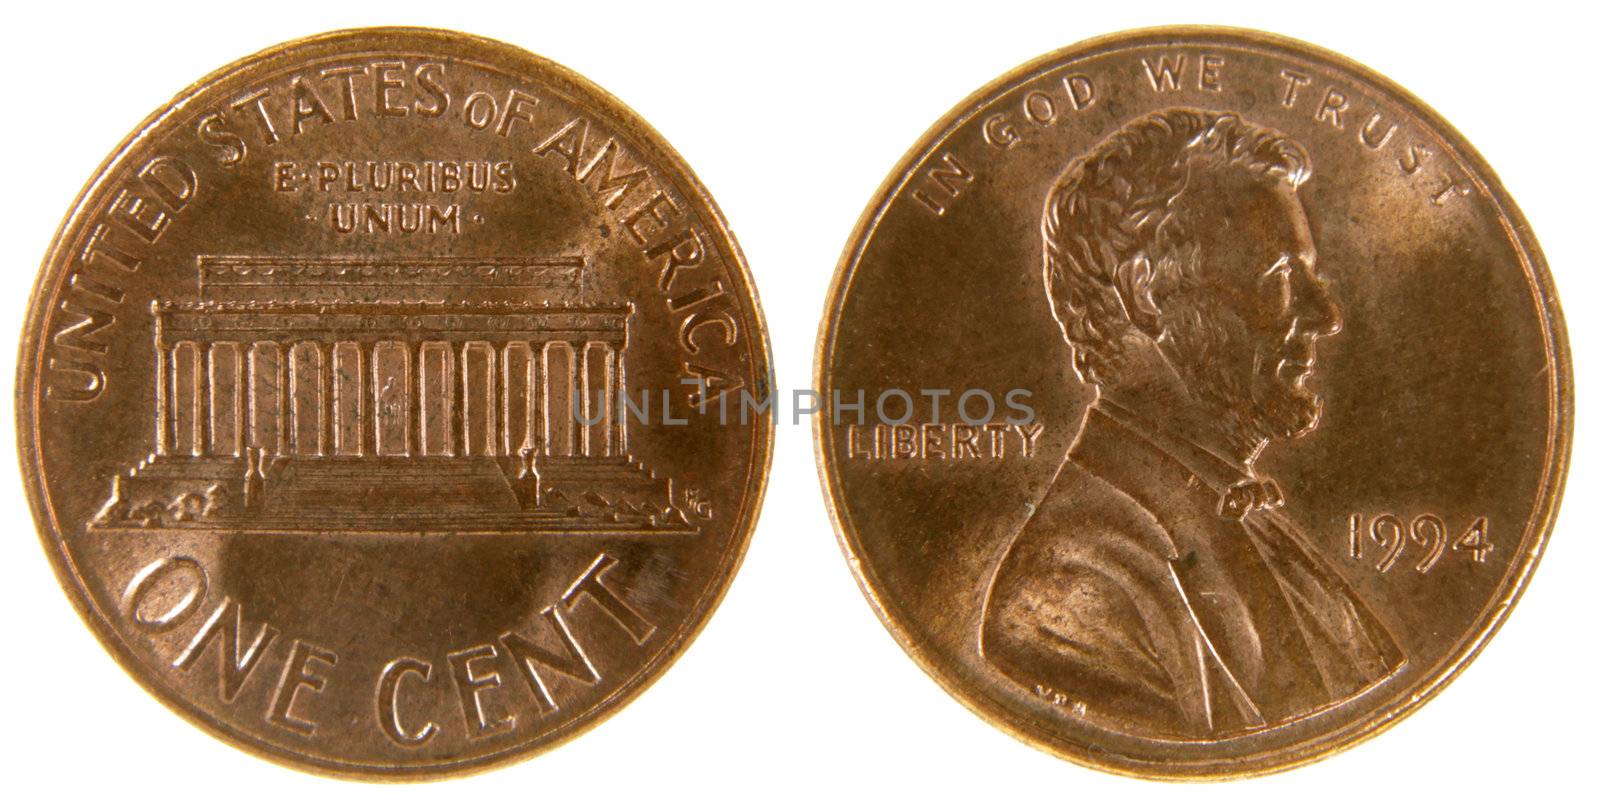 American Penny
 by ca2hill